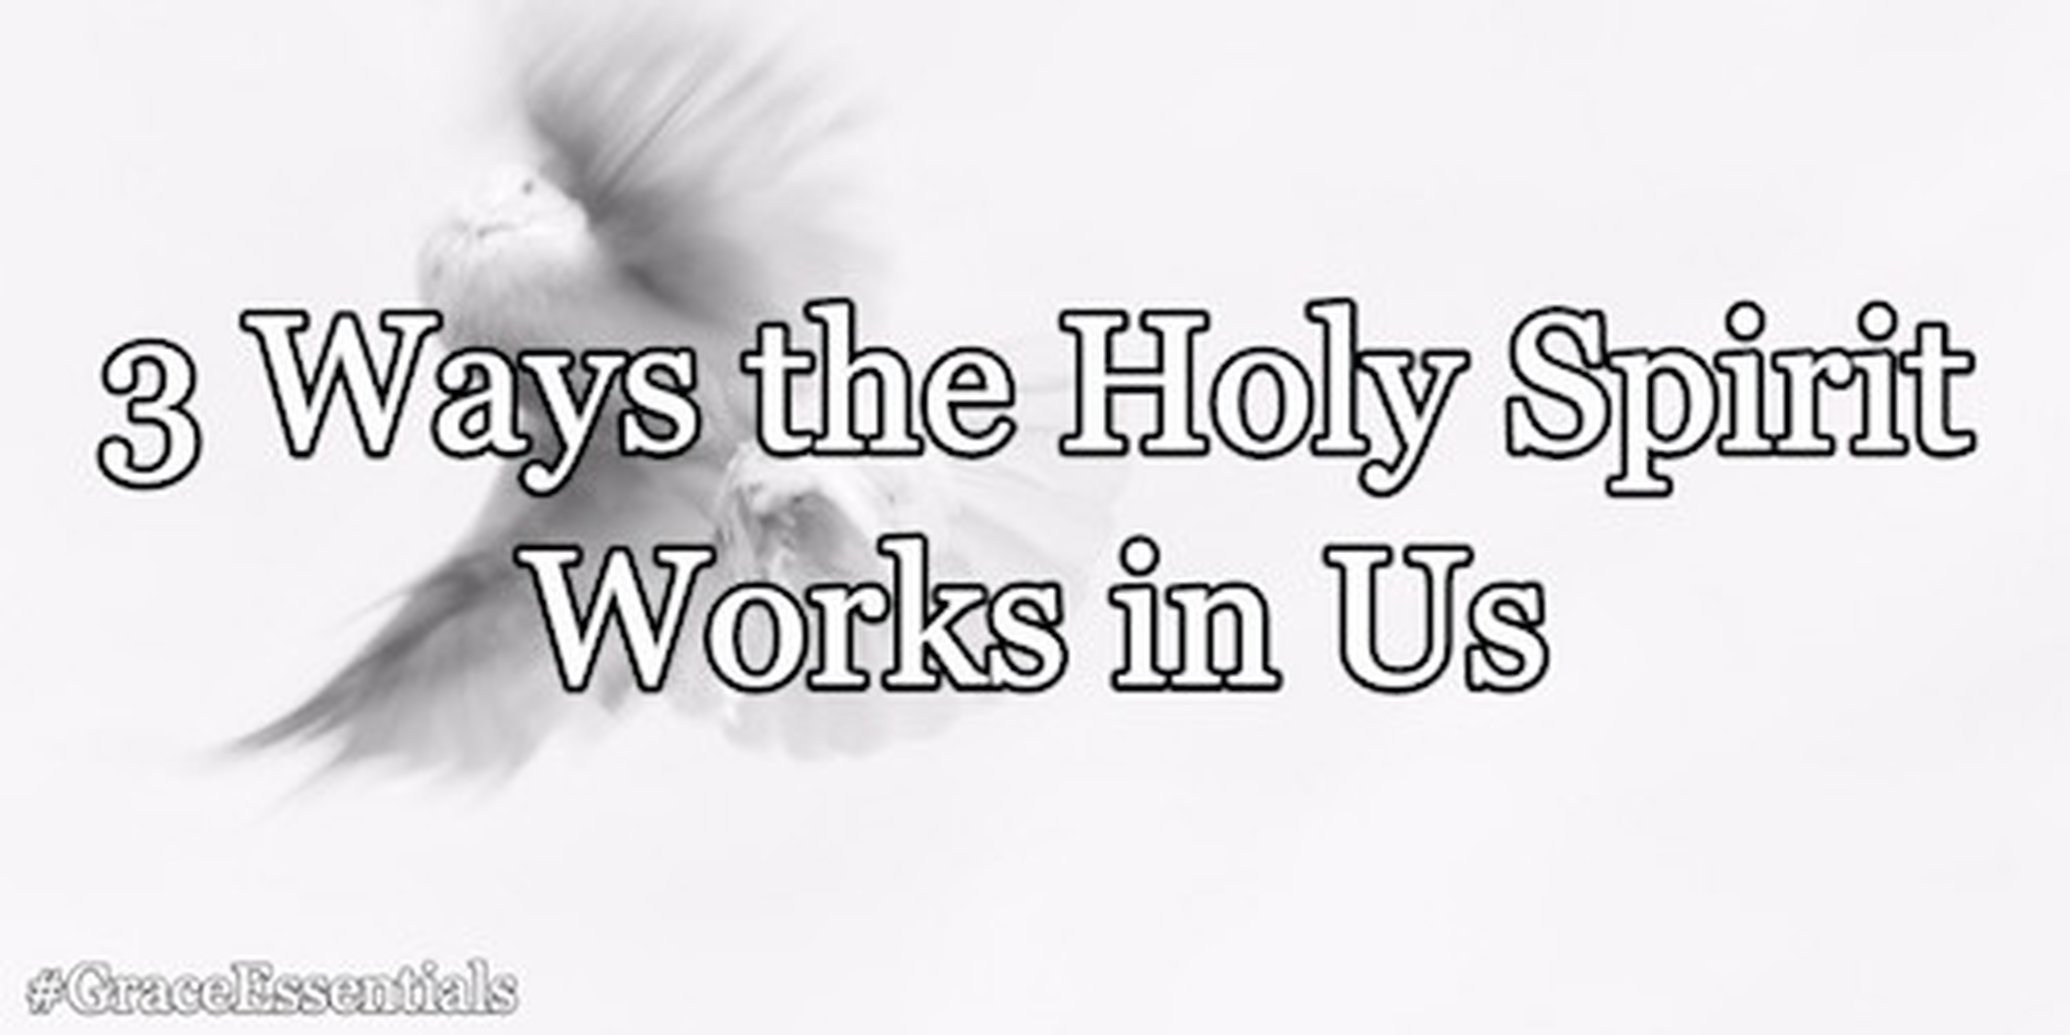 3 Ways the Holy Spirit Works in Us